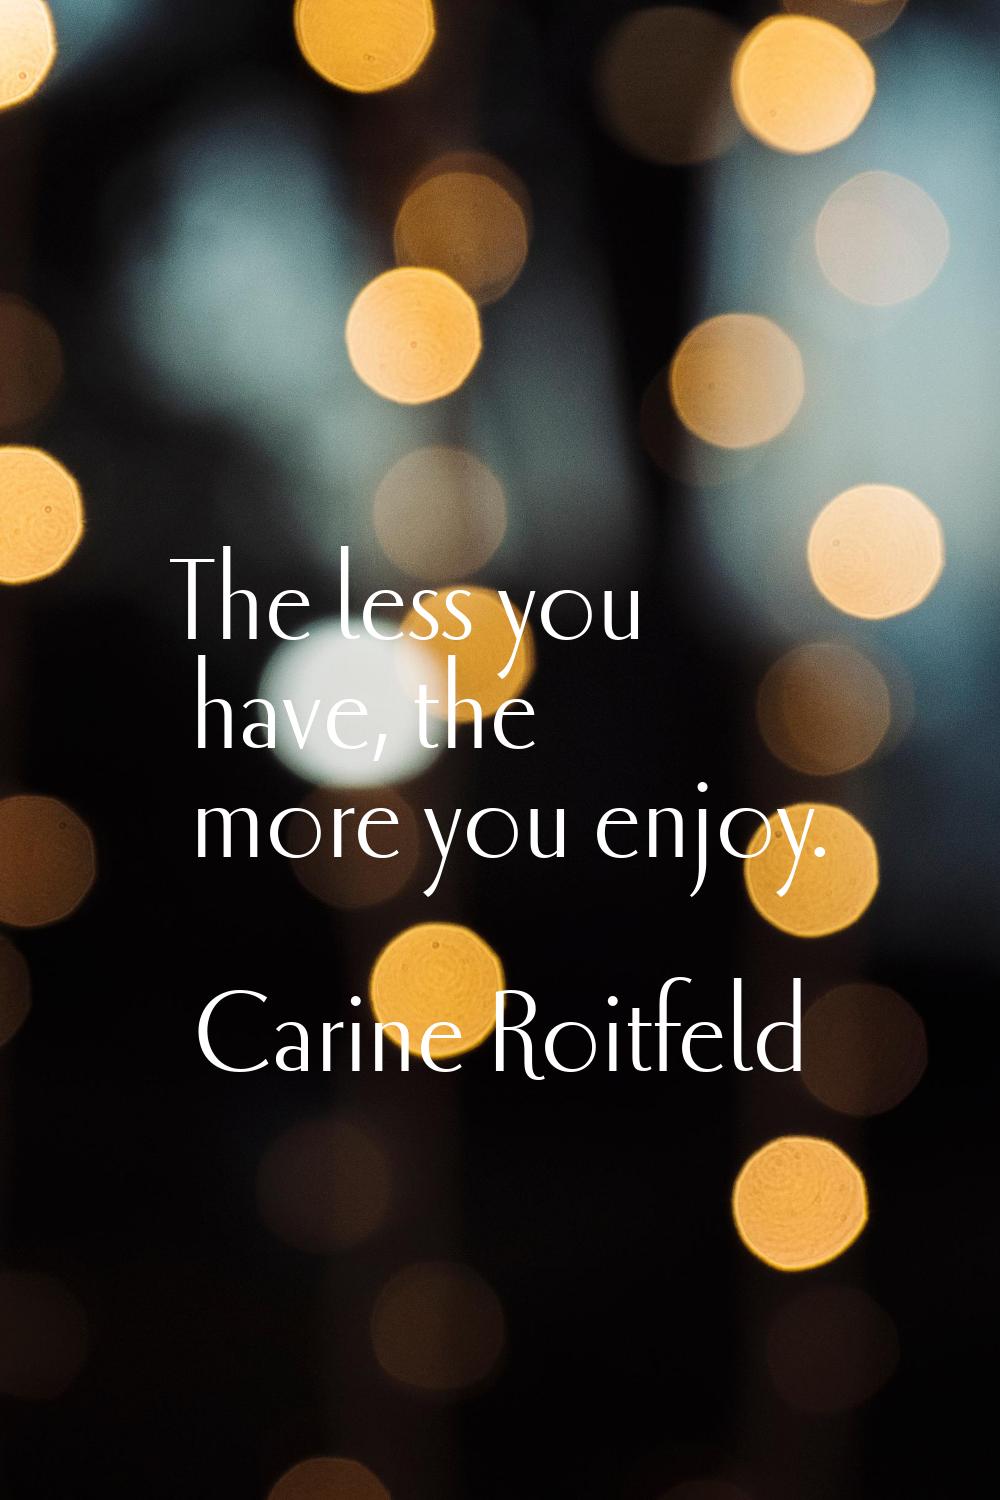 The less you have, the more you enjoy.